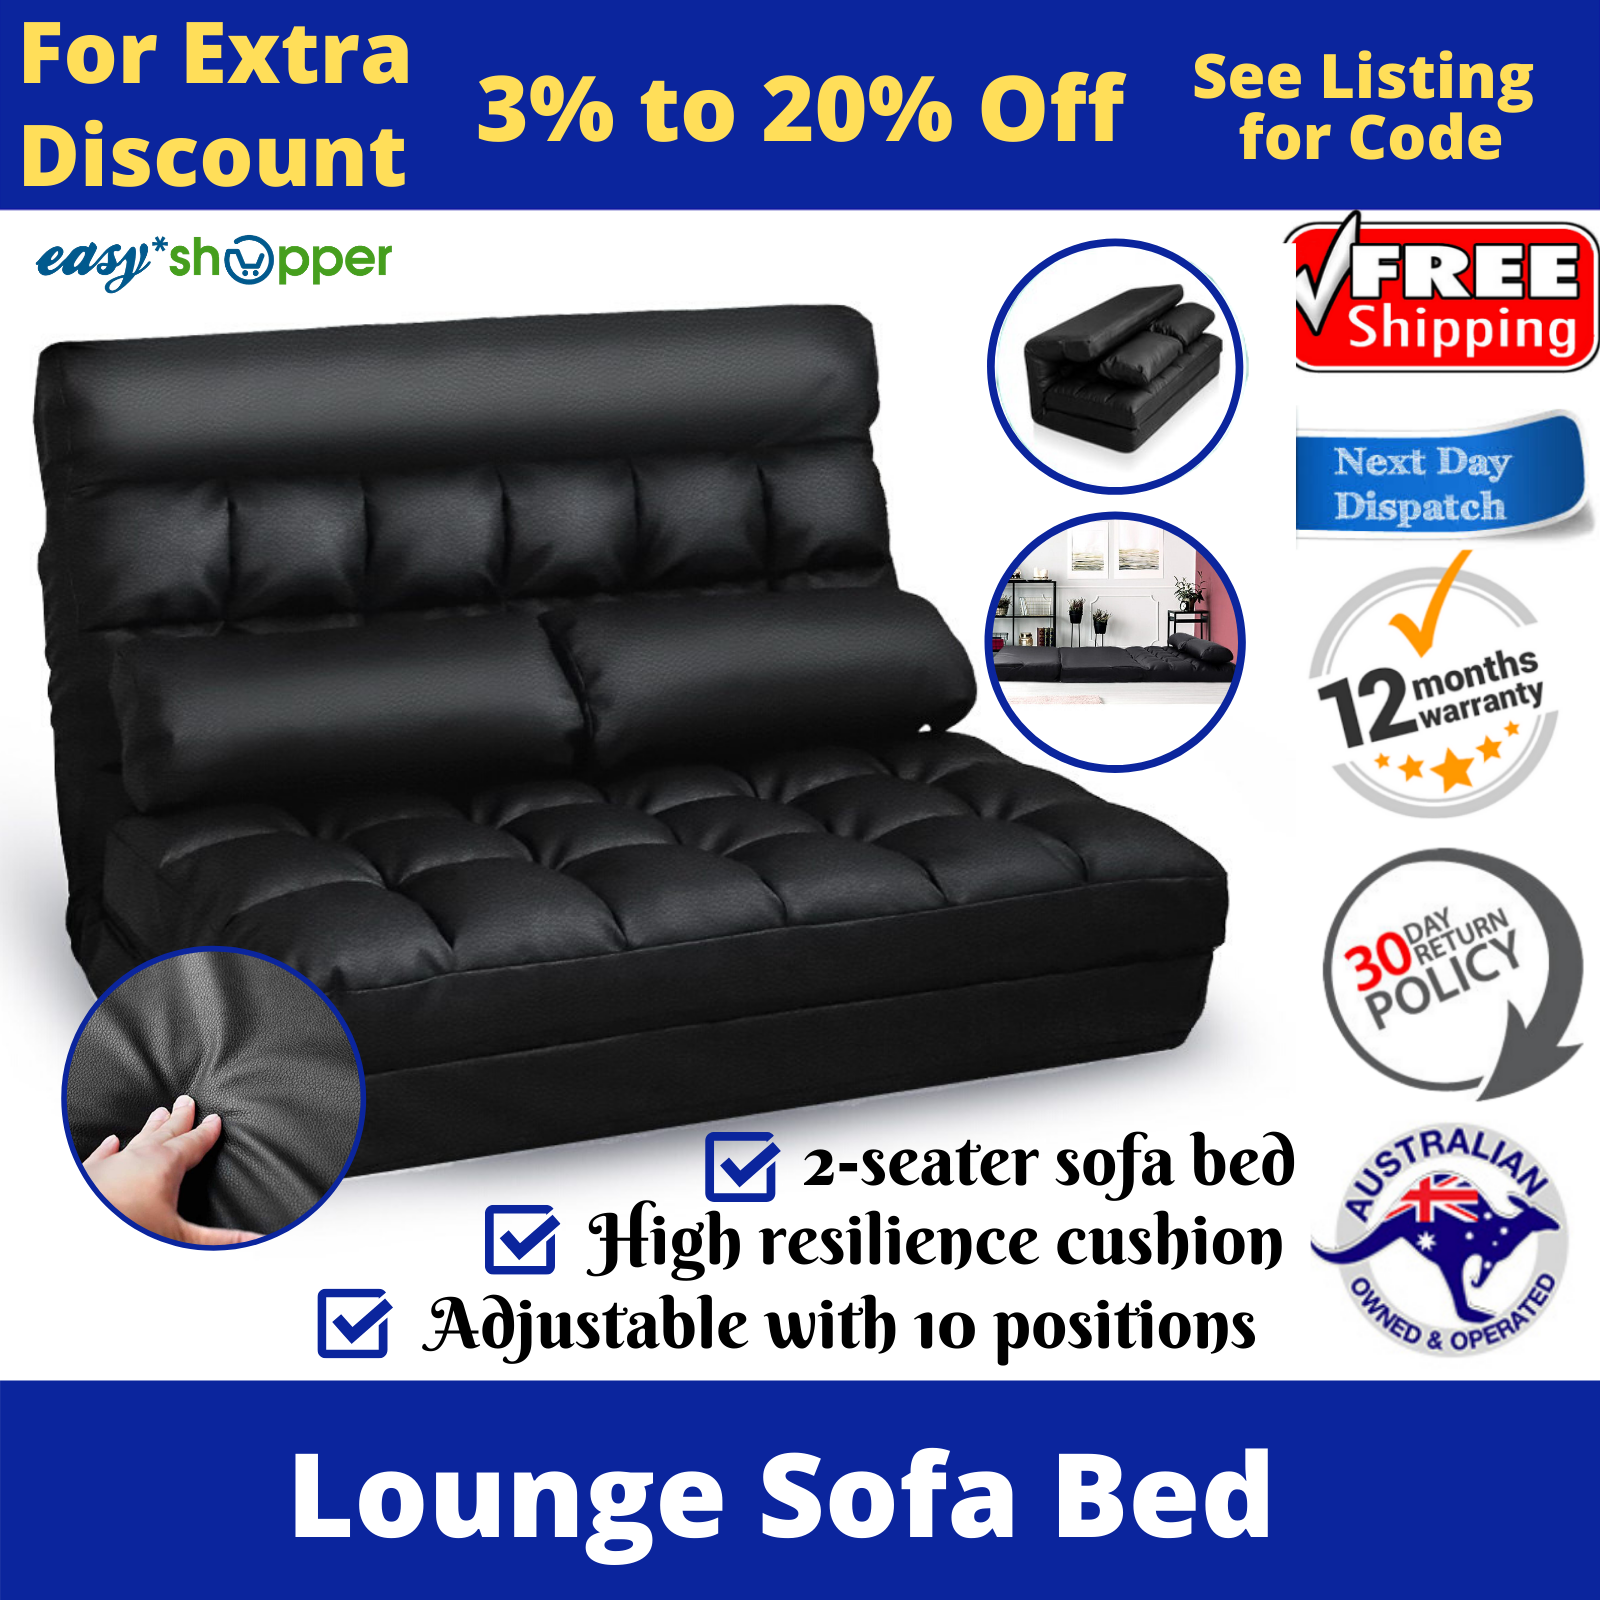 Futon Bed Lounge Sofa Bed Gallery Image 